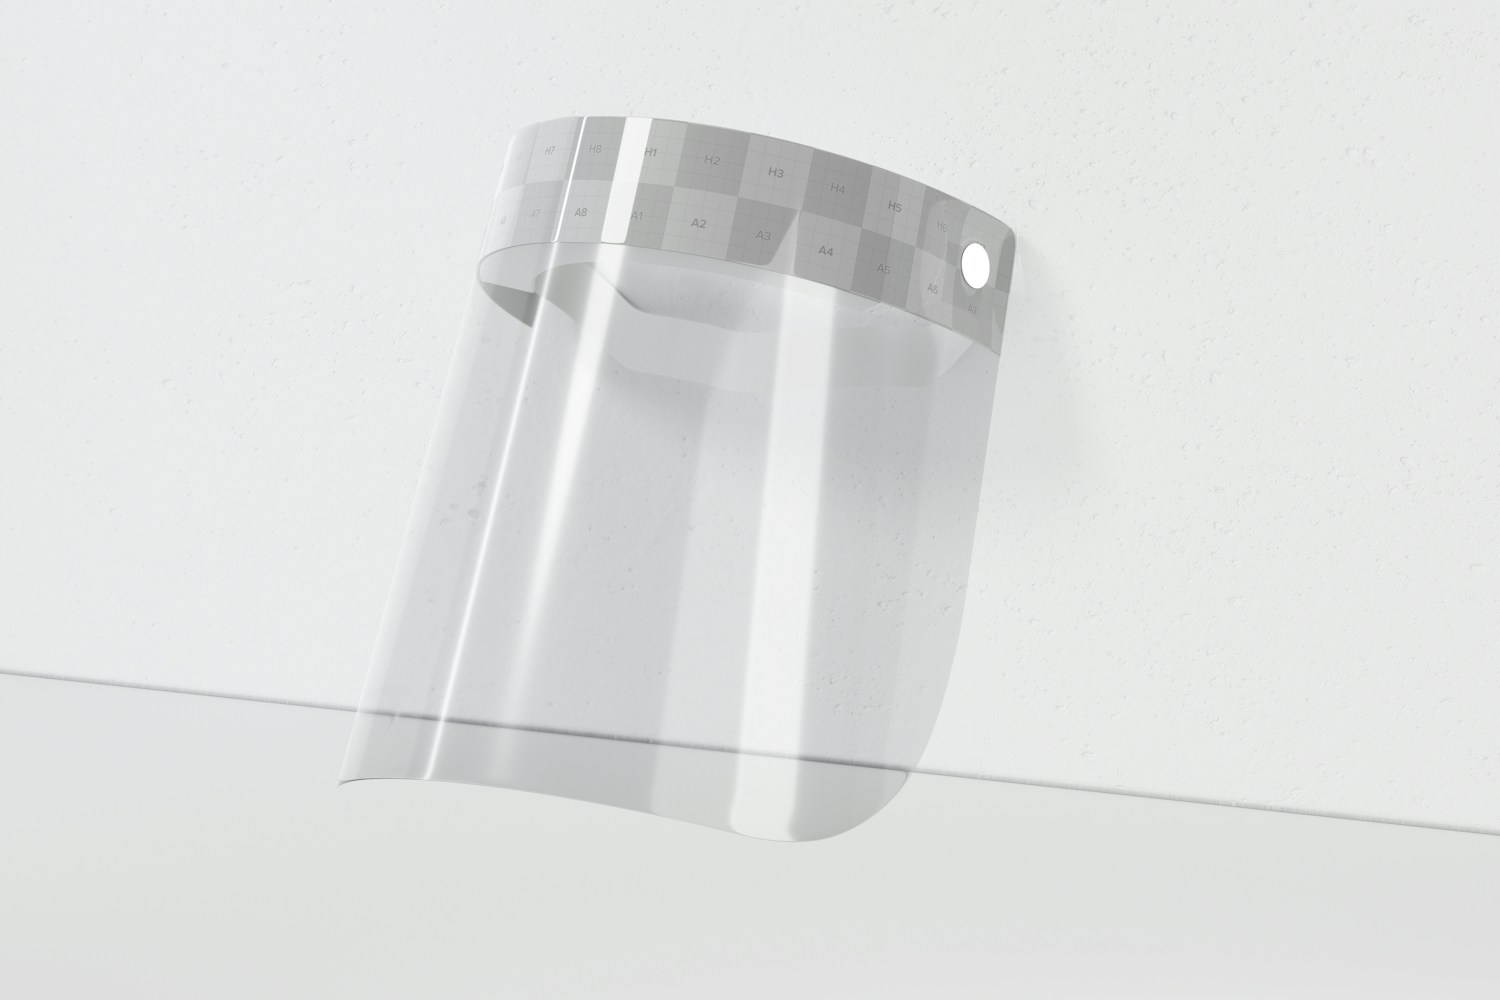 Face Shield Mockup, Perspective View